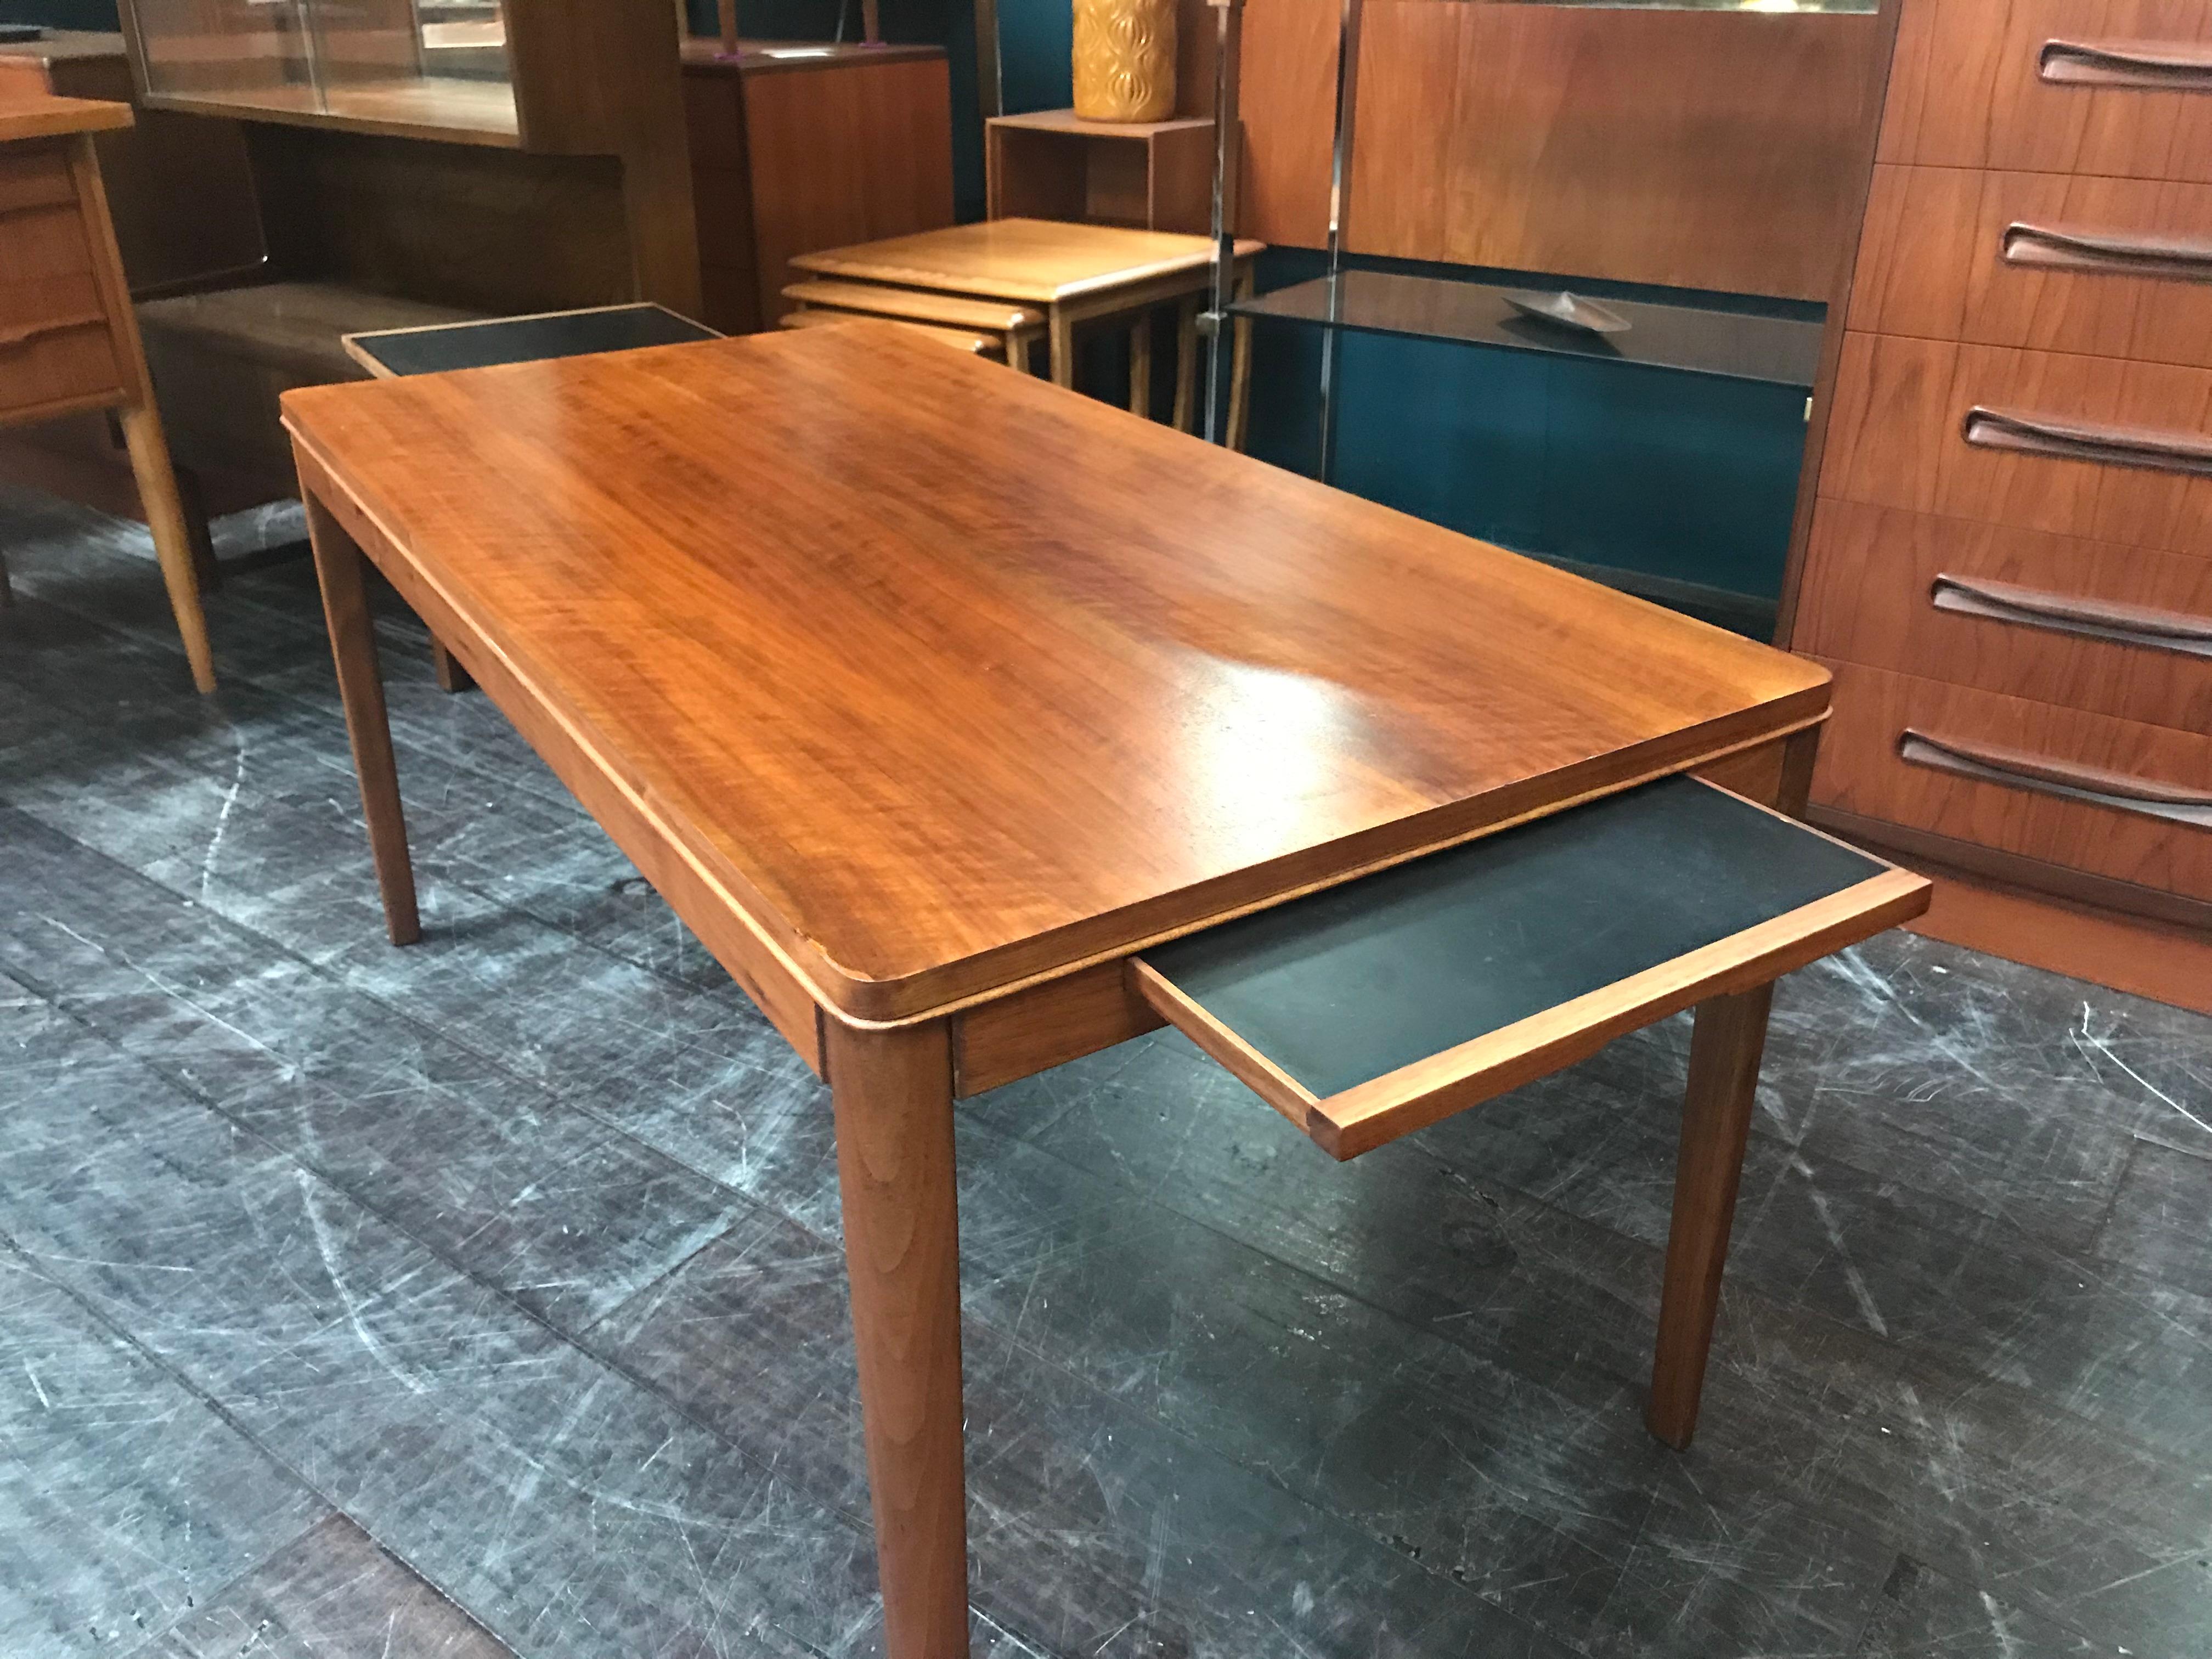 This stunning Swedish coffee table is a fantastic piece, designed by Sven Engstrom & Gunnar Myrstrand for Tingstrom as part of the Aristocrat series. The table has two little slide out sections that are cleverly hidden within its ends. These extend